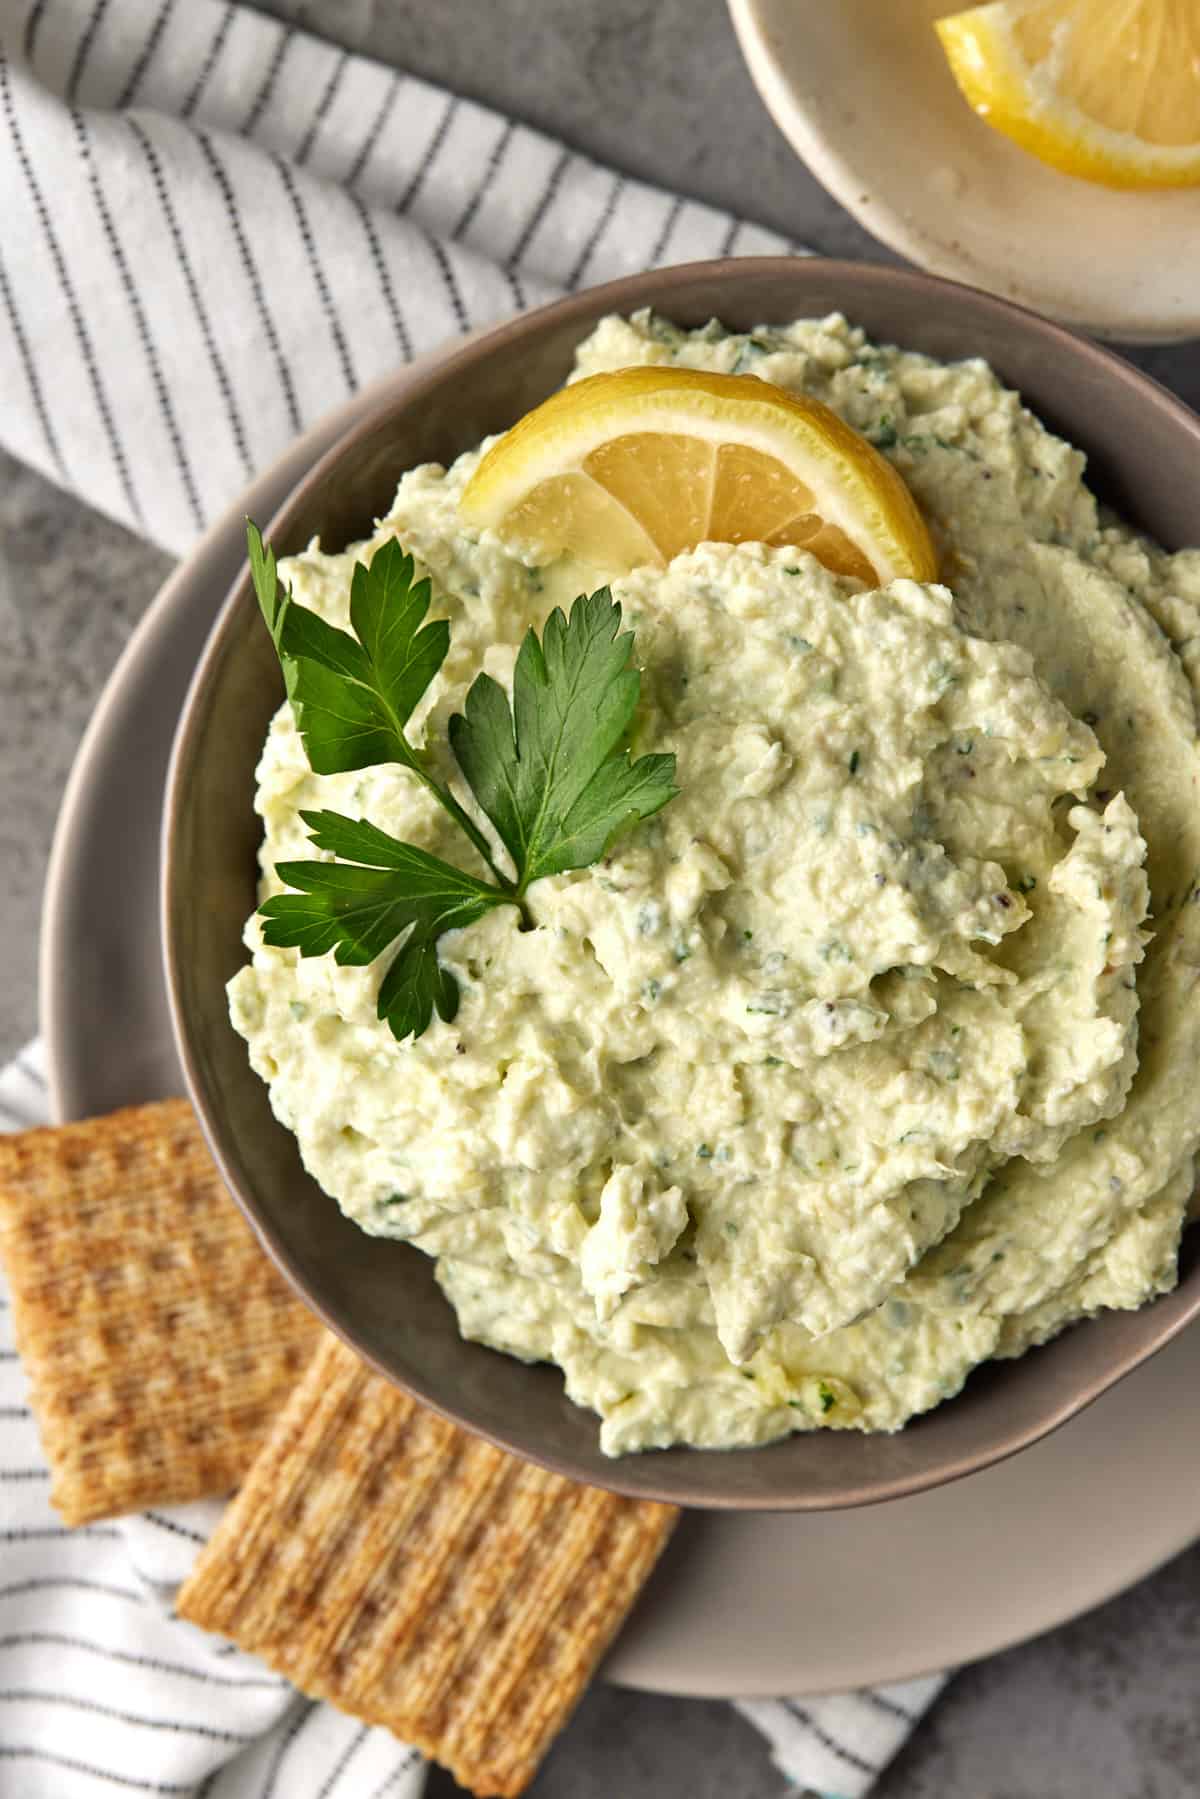 Bowl filled with artichoke dip and garnished with lemon and parsley.